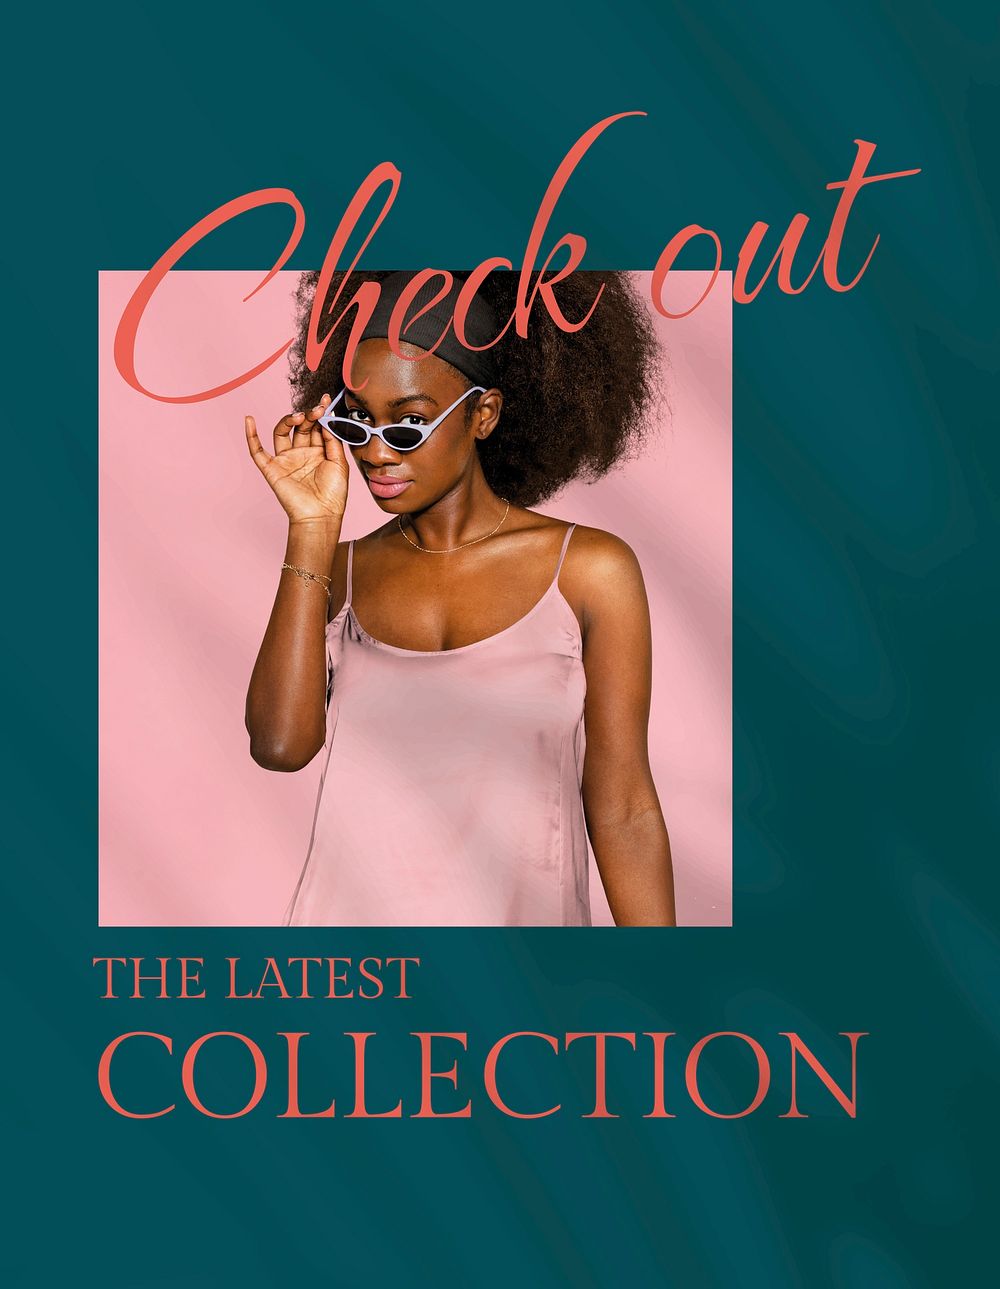 Fashion collection flyer template, editable text psd